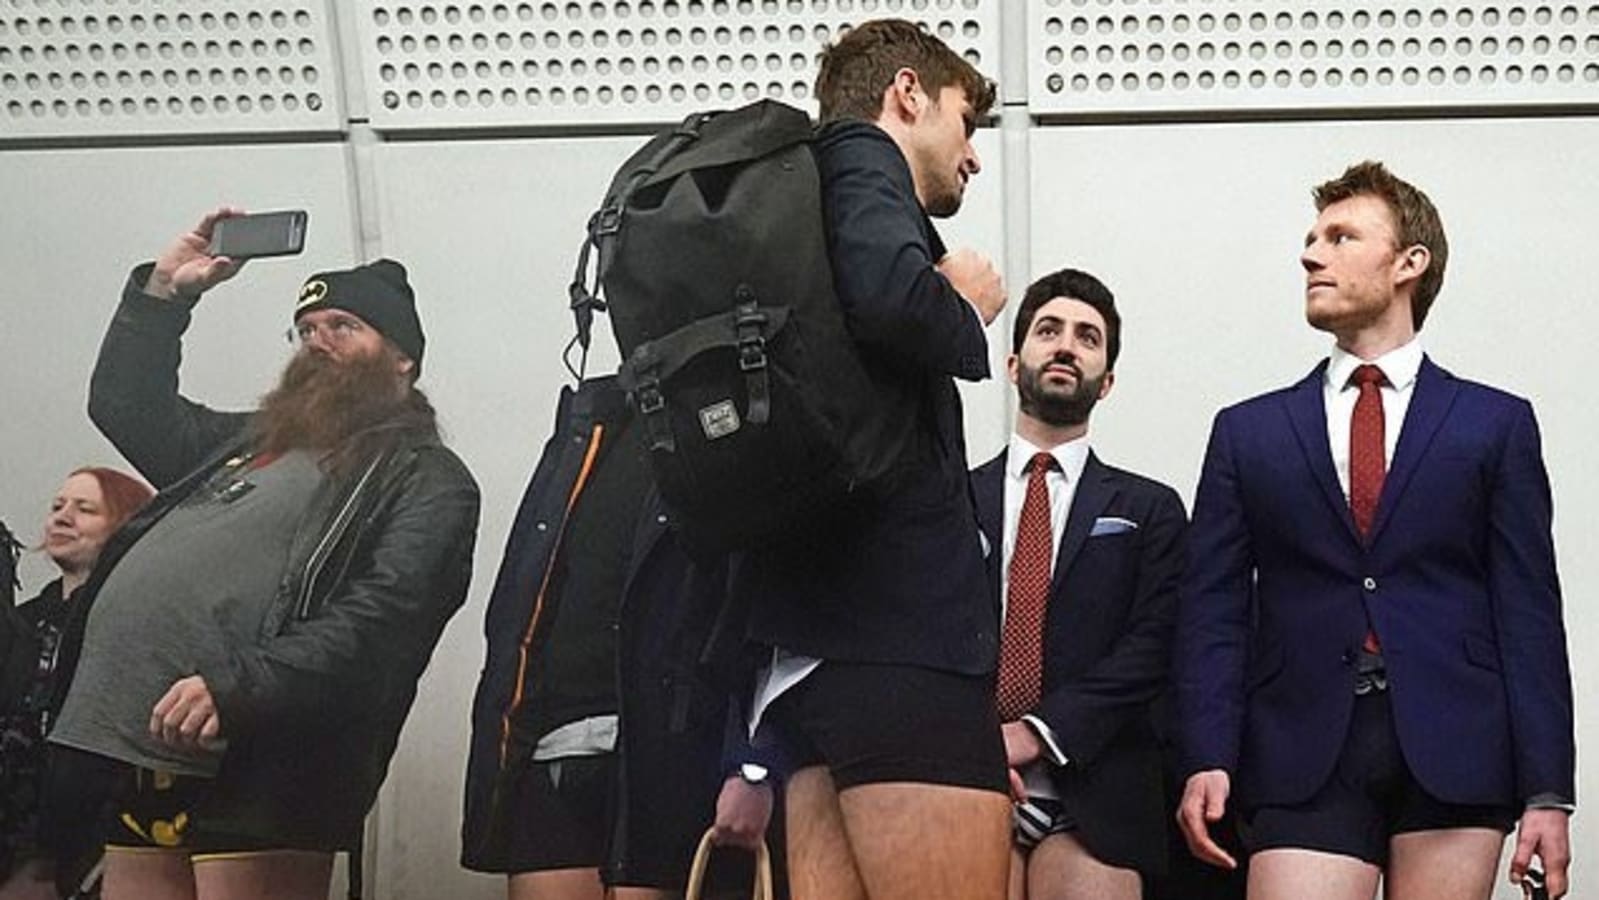 London Passengers Travel Without Pants for 'No Trousers Tube Ride